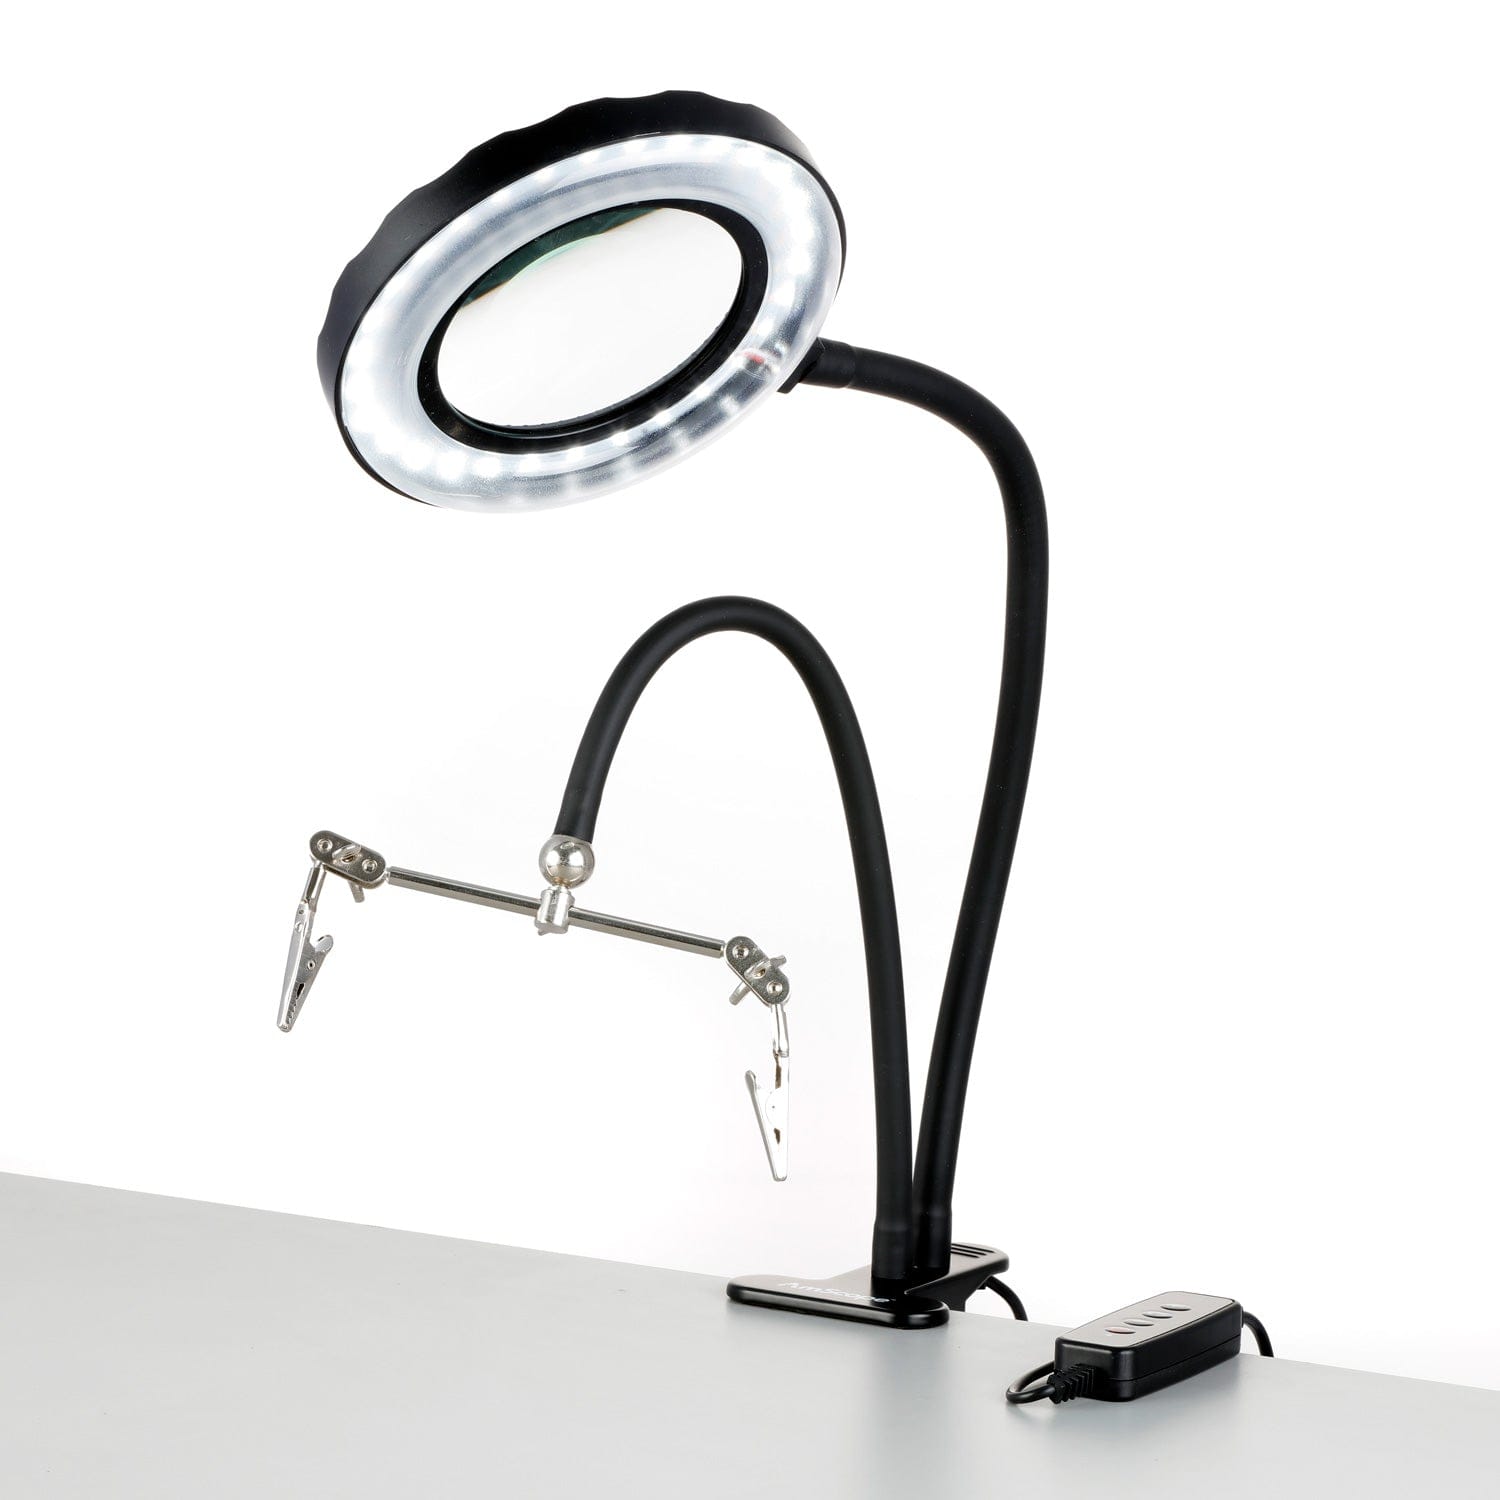 TheLAShop 5-Diopter Clamp-On Illuminated Magnifier Lamp Magnifying Lig –